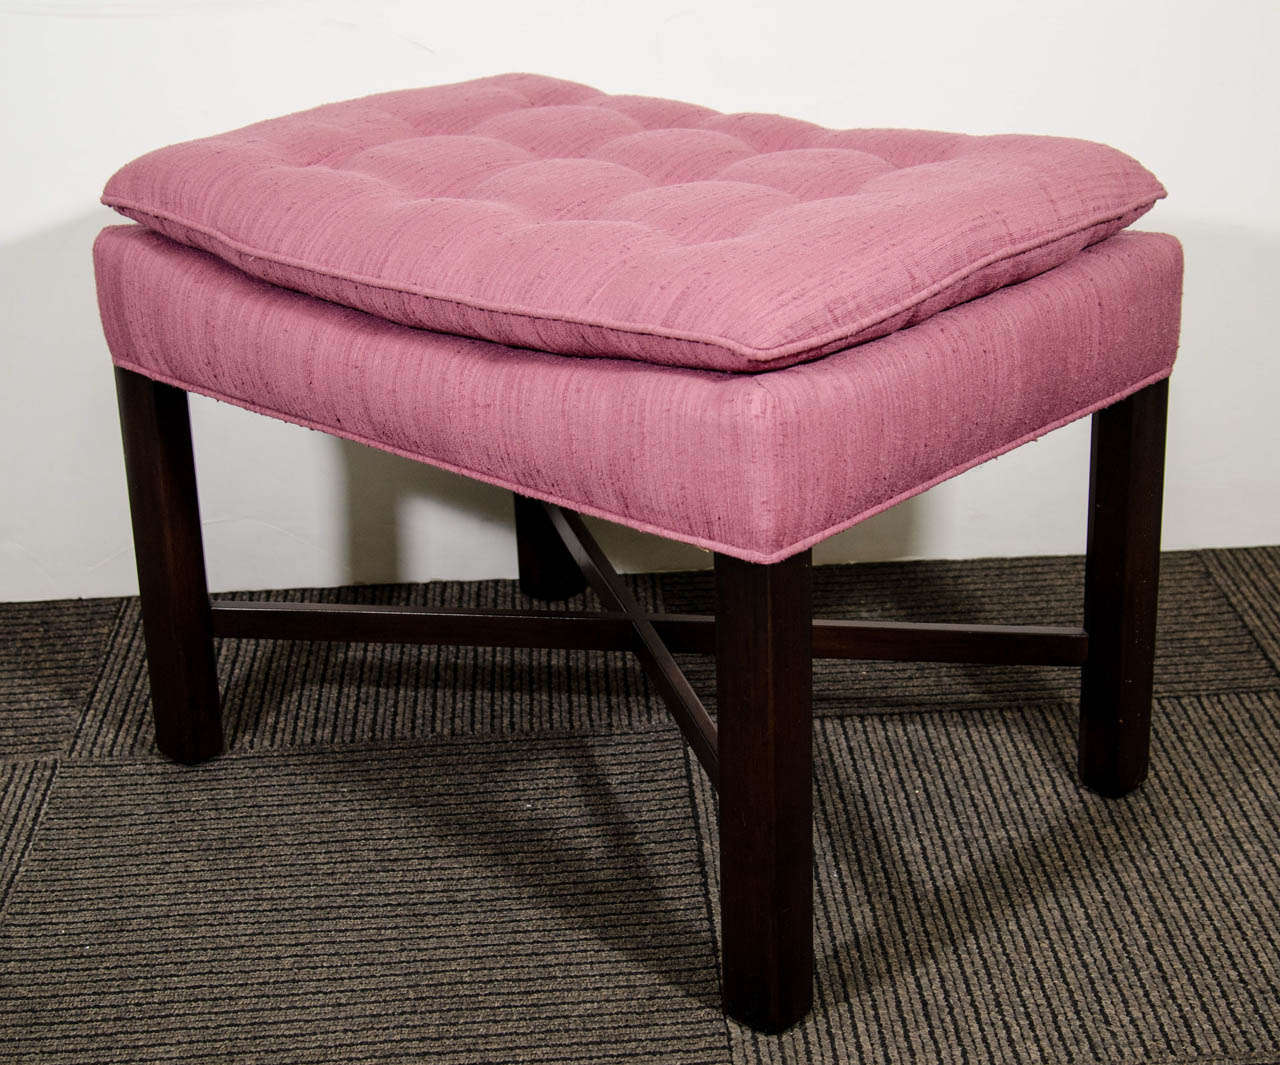 A vintage pair of wooden x-form benches upholstered in button tufted rose fabric.